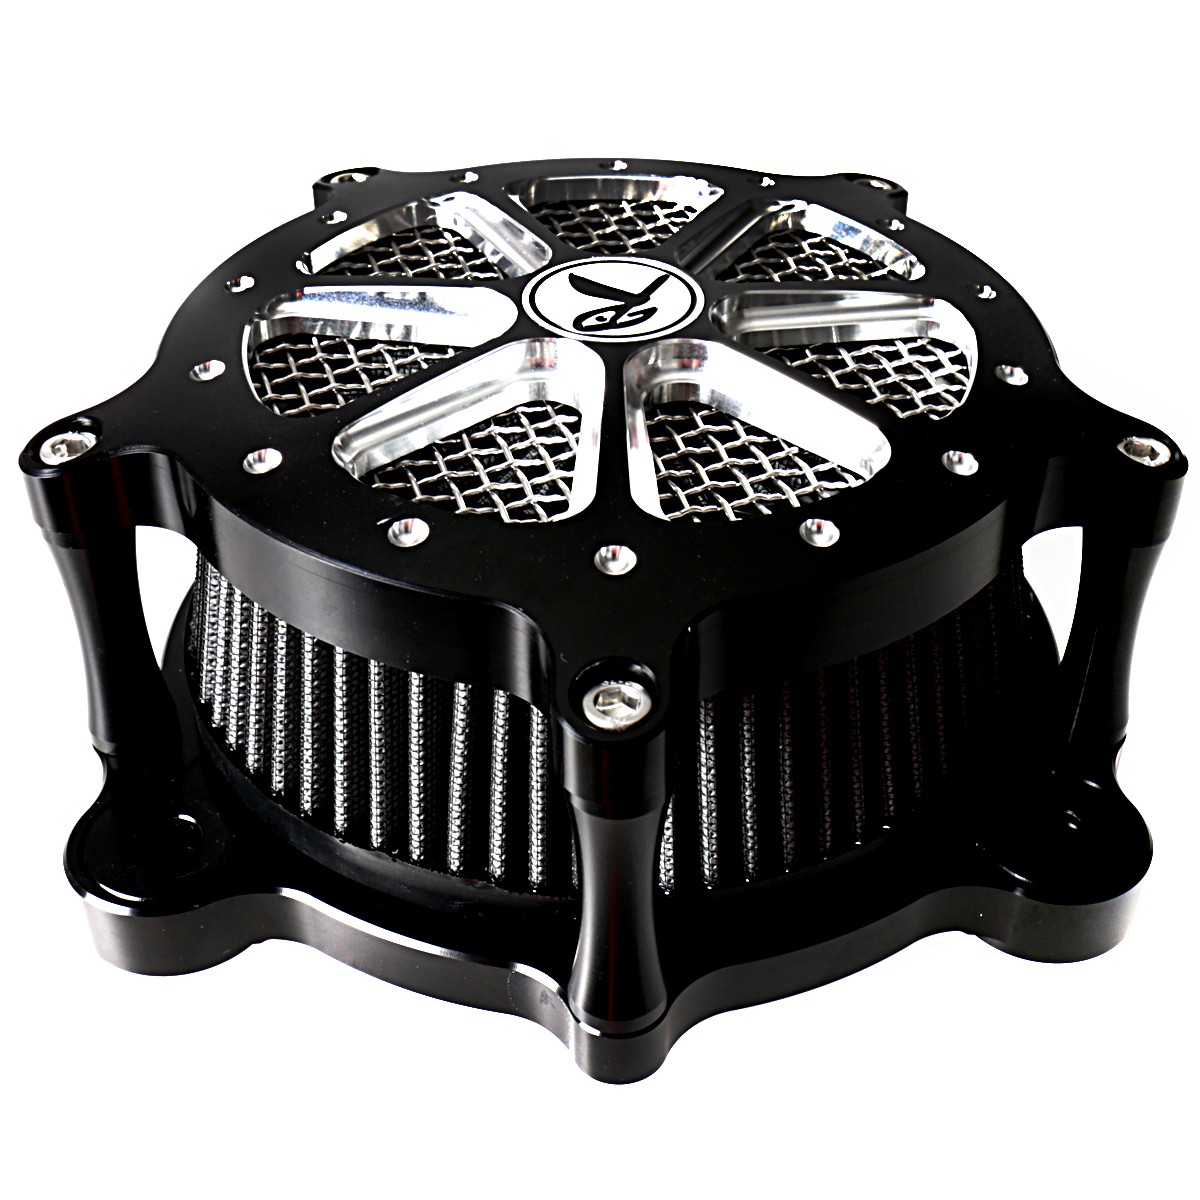 Shallow Cut Billet Aluminum Air Cleaner Intake Filter System Fit For Harley Softail Dyna 1993-2013 Models